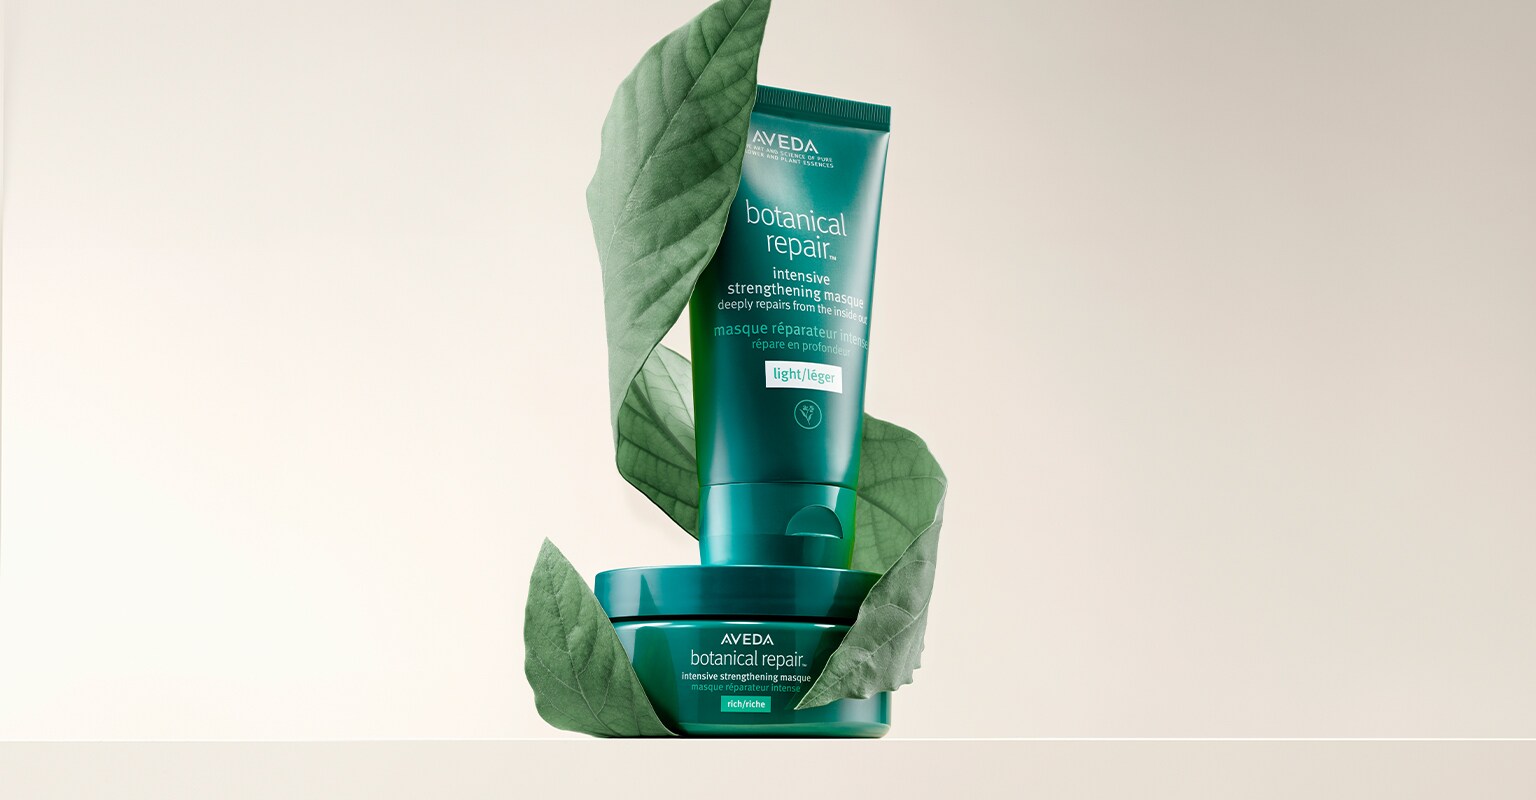 Restore damaged hair with botanical repair masques to strengthen hair from the inside out.